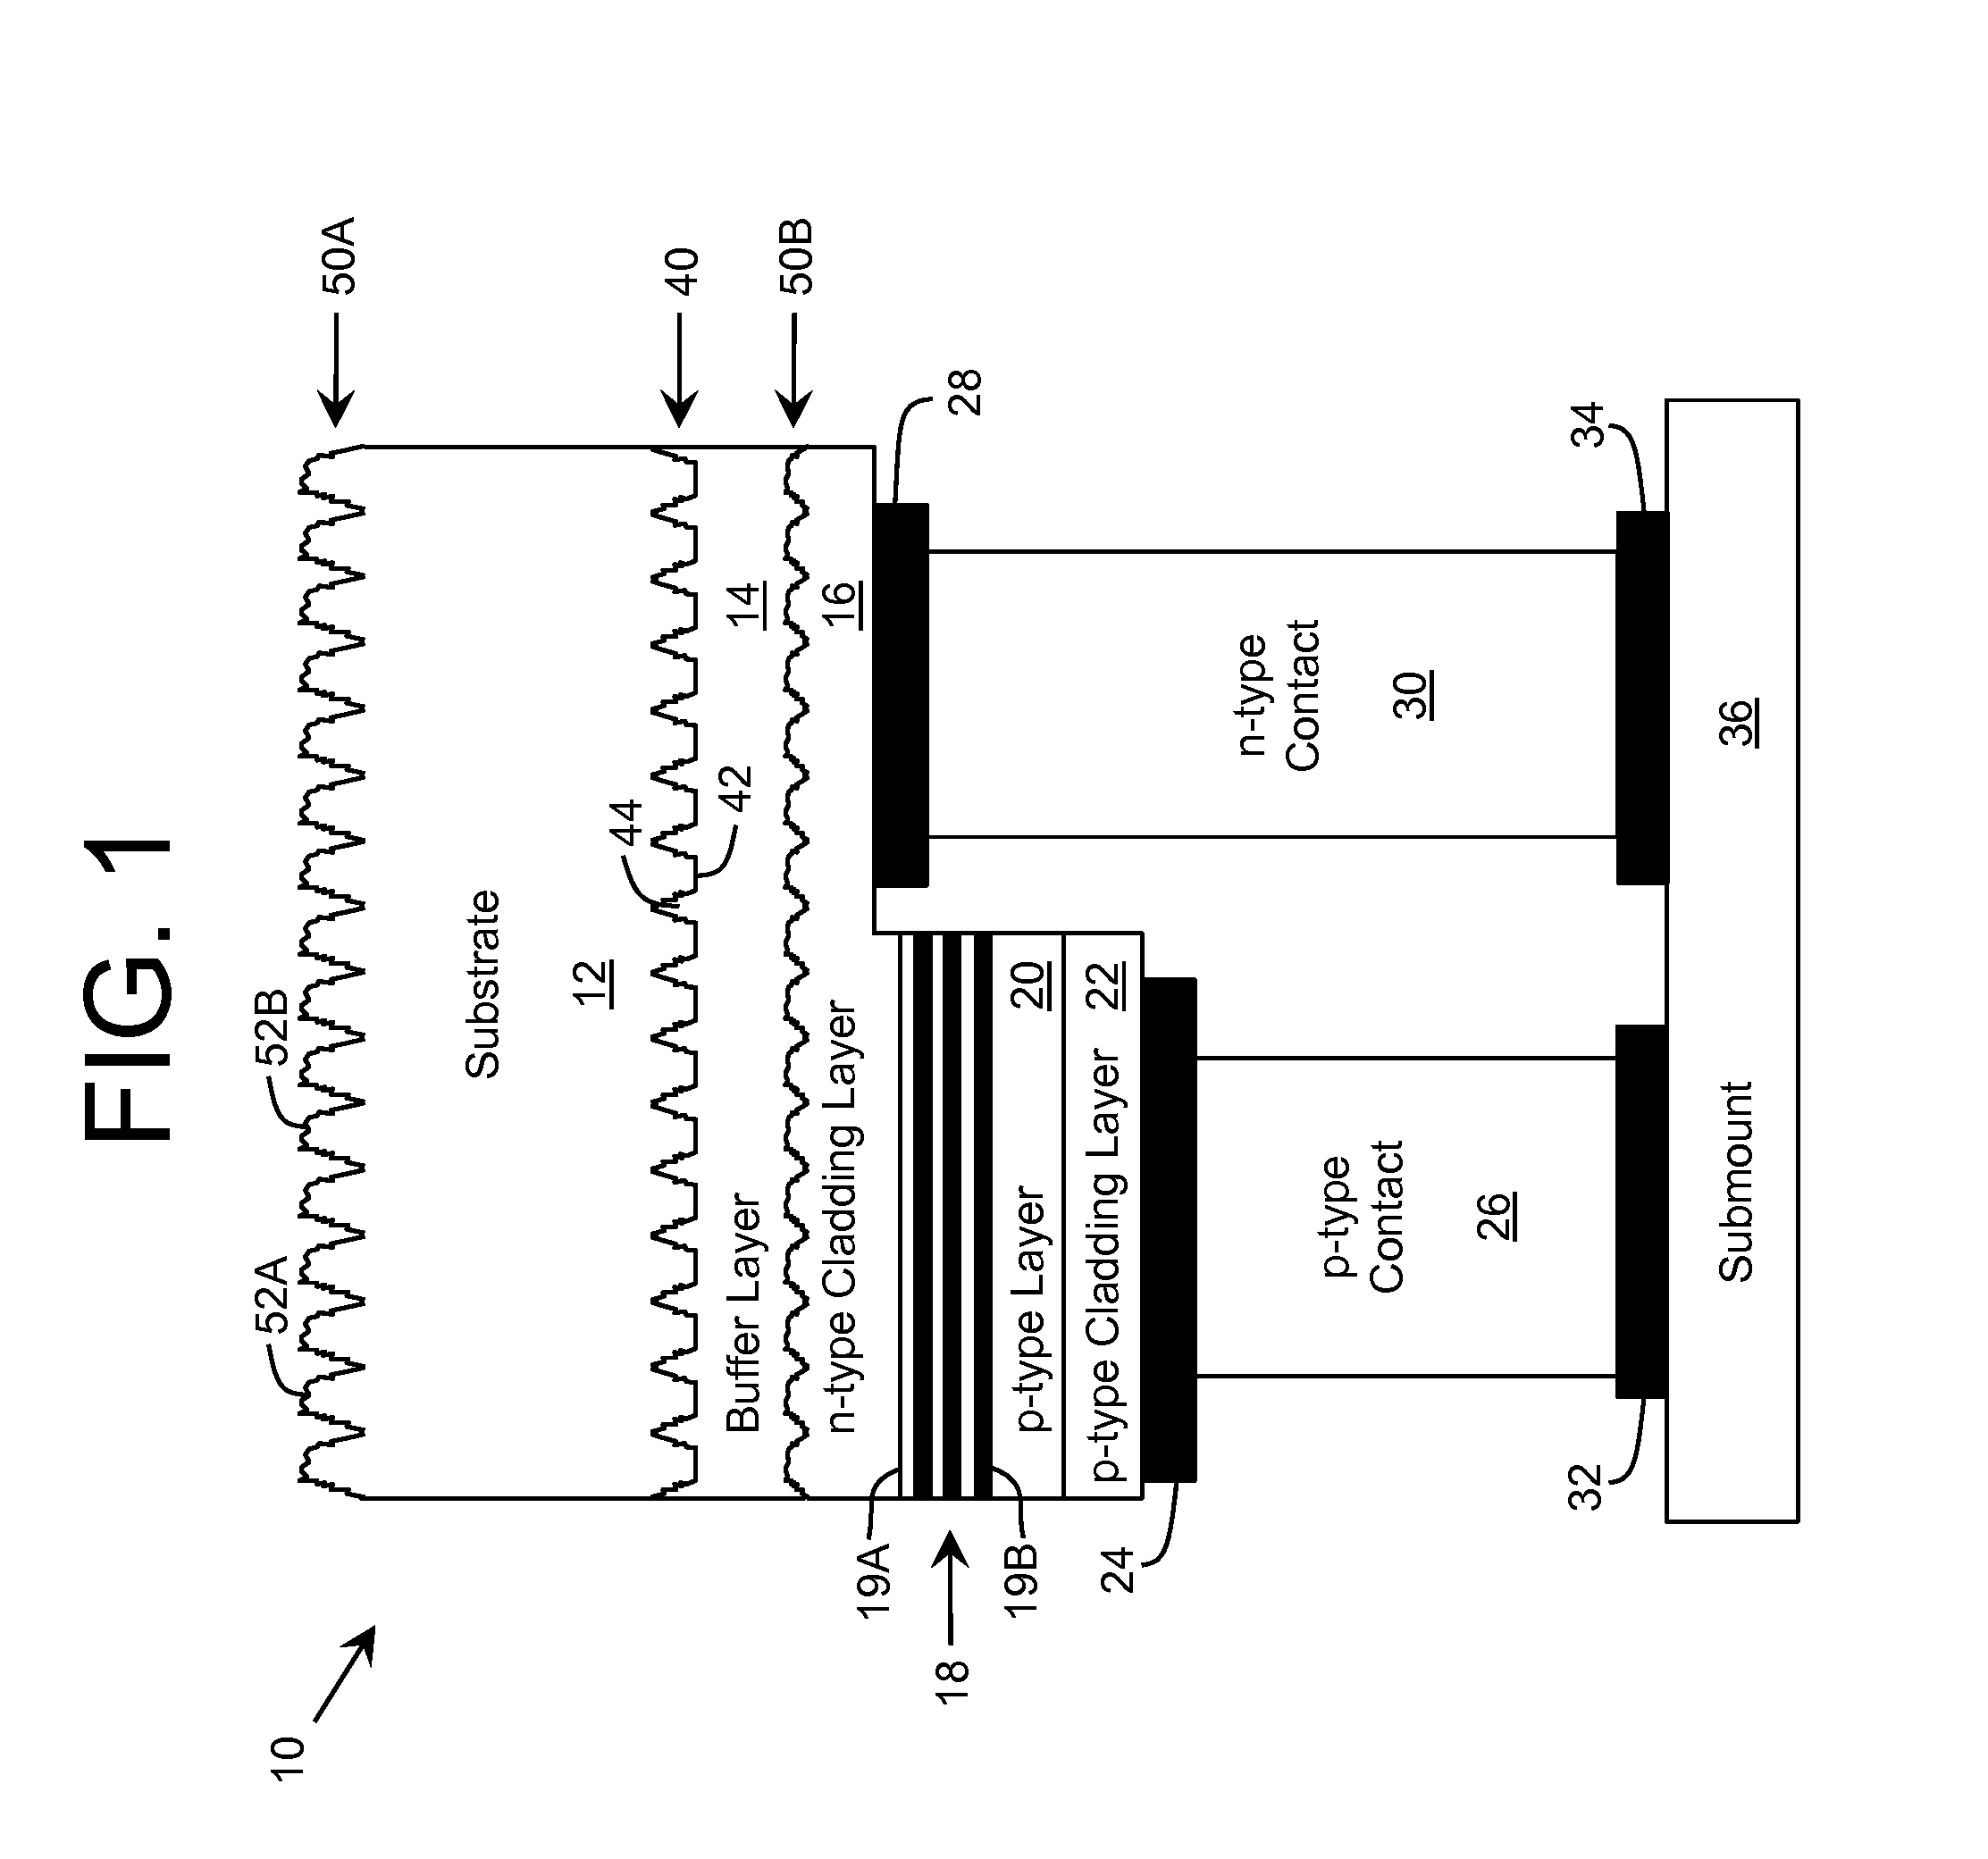 Patterned Substrate Design for Layer Growth